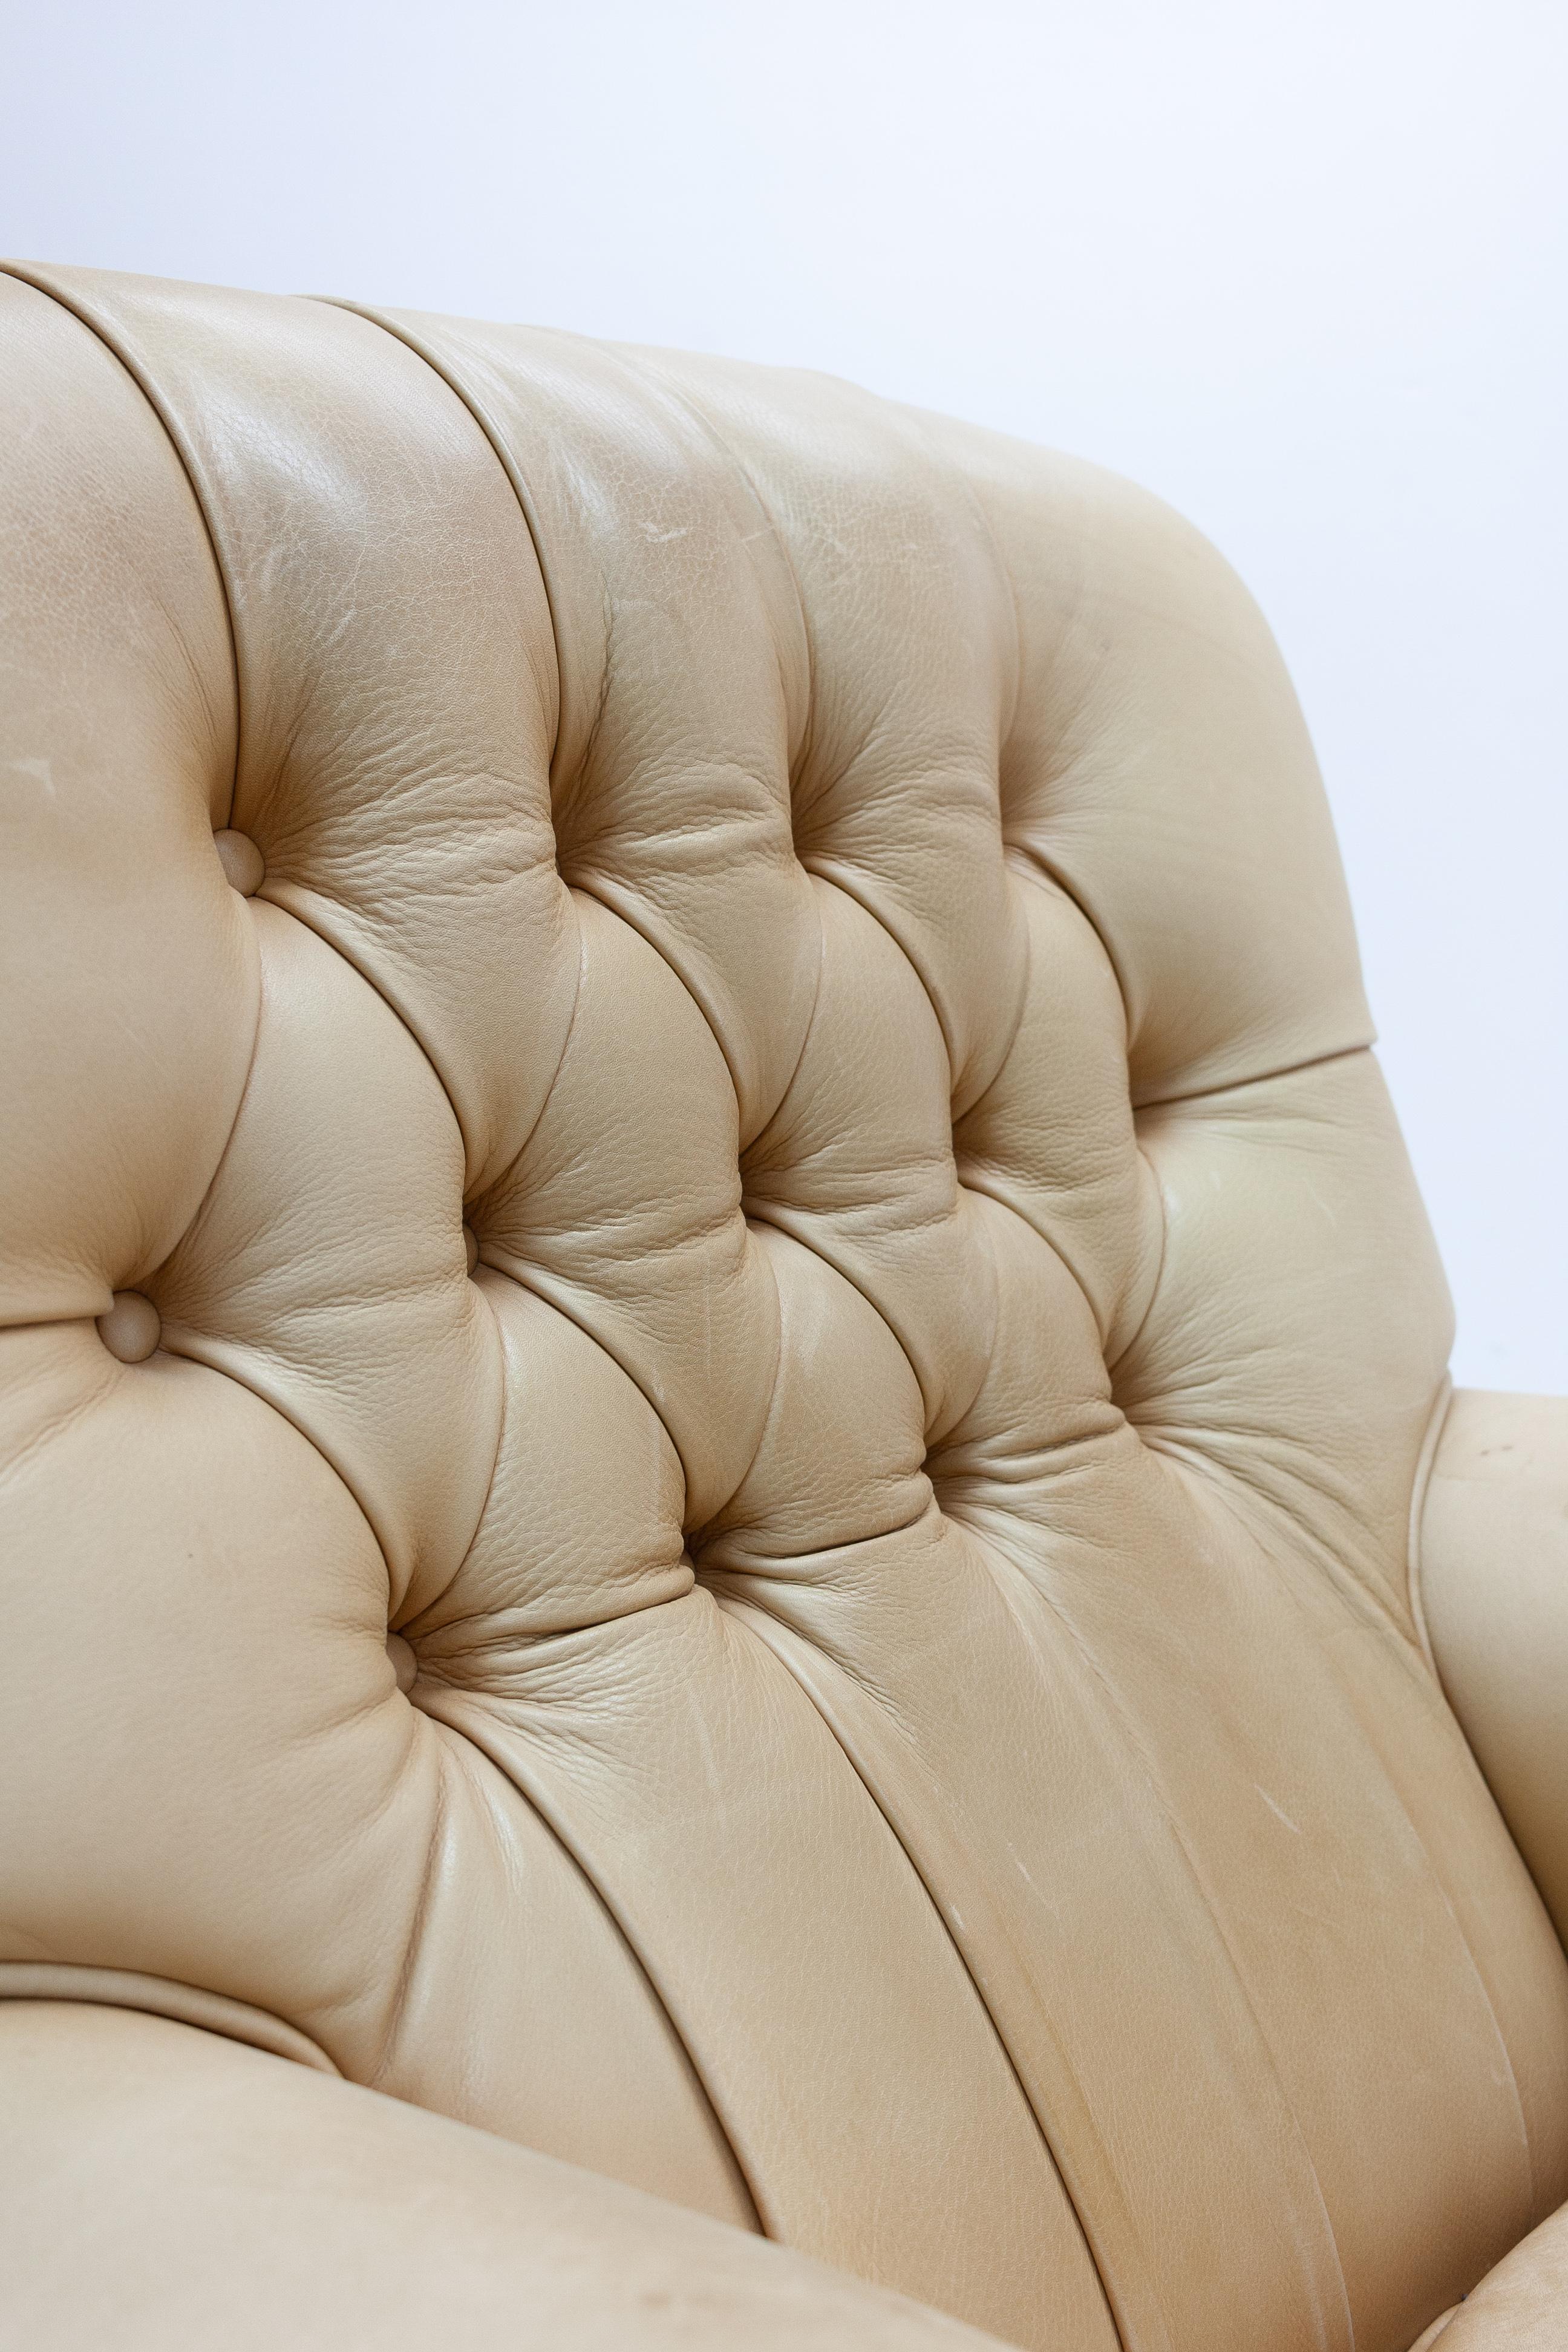 American Classical American Leather Lounge Chair